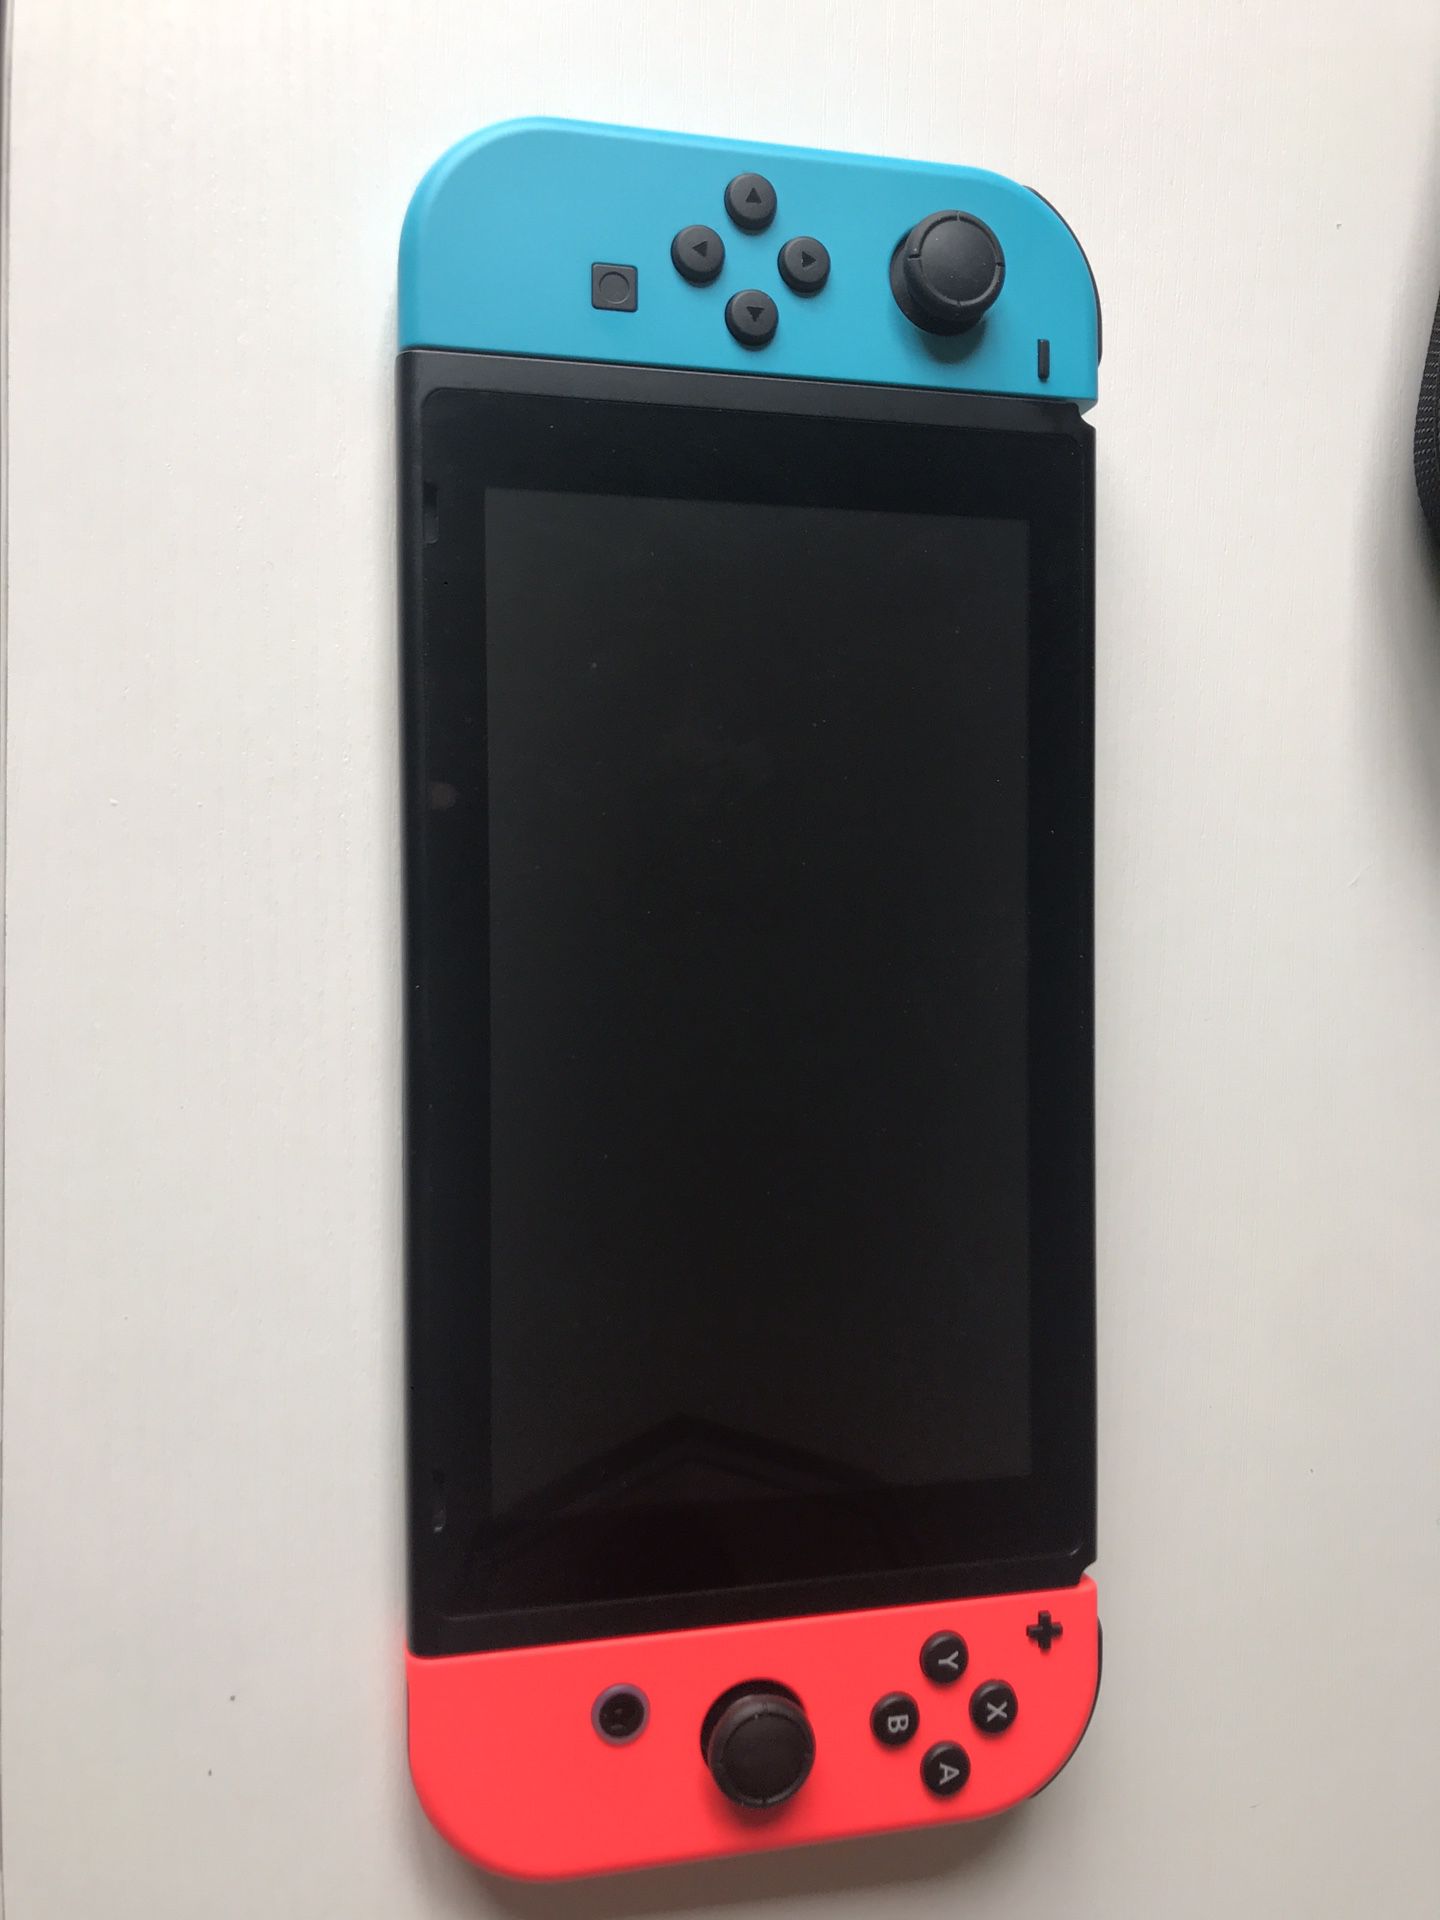 Nintendo switch with super smash bro’s and carrying case.